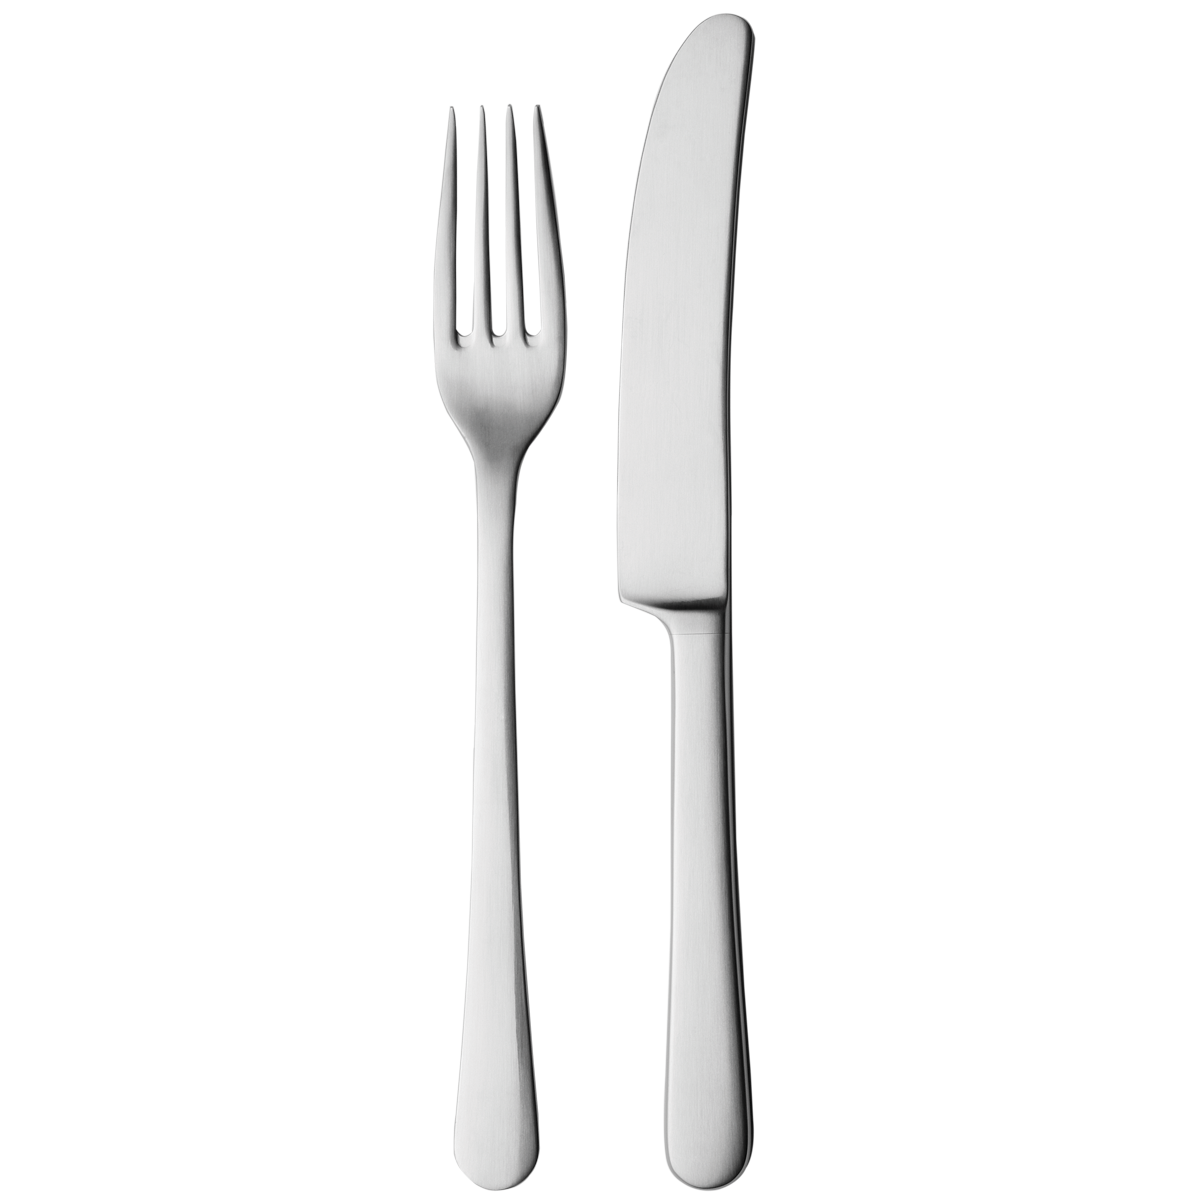 Fork And Knife Png | Free Download Clip Art | Free Clip Art | on ...